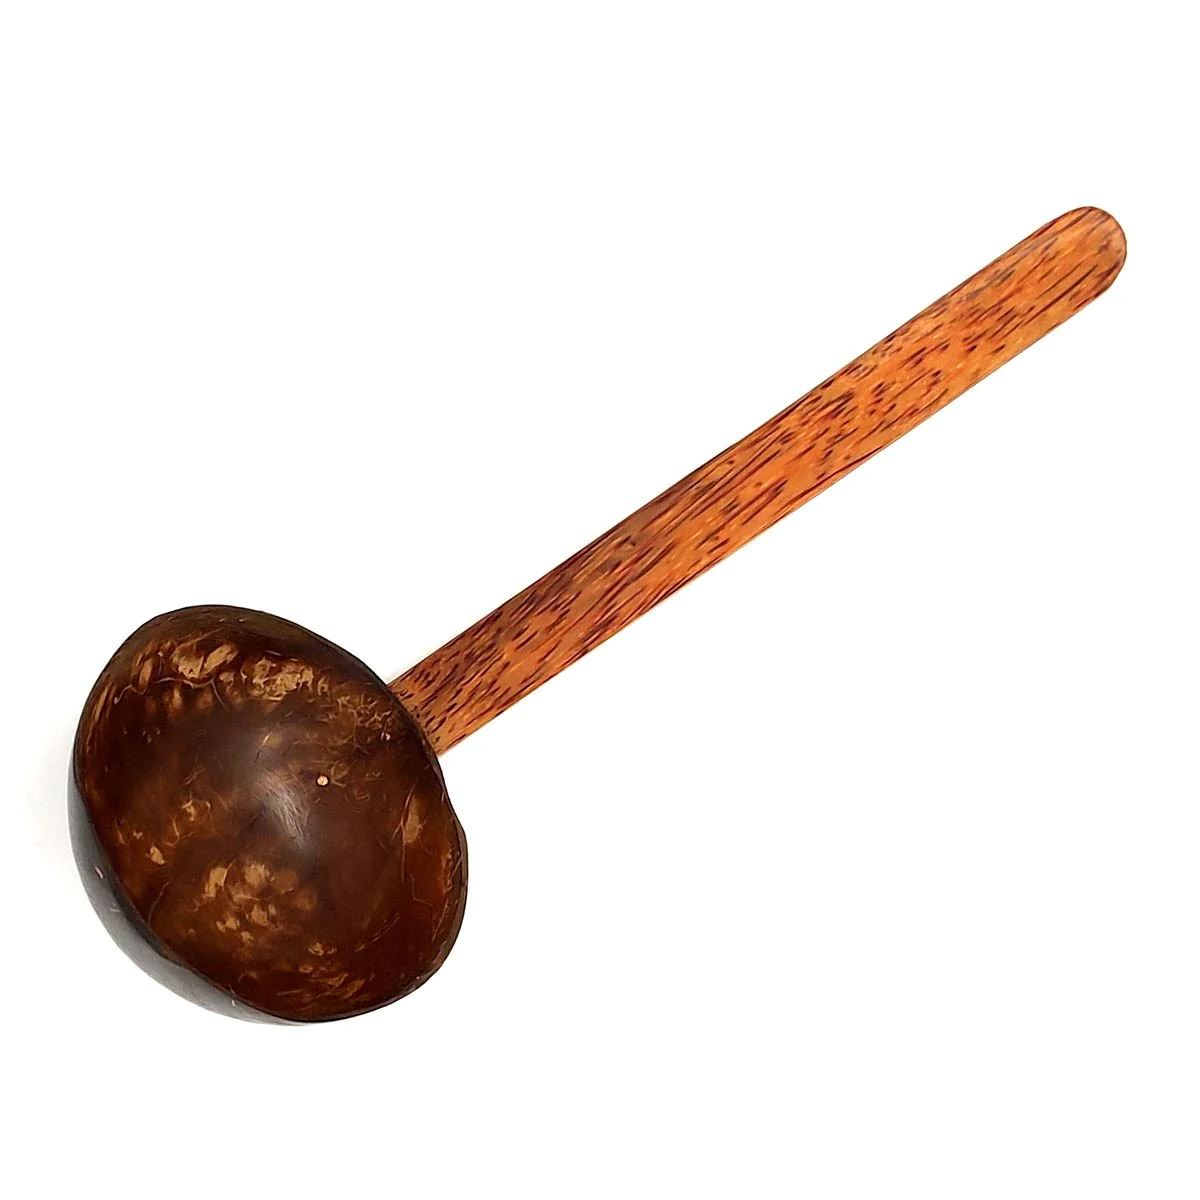 Ecocraft India Coconut Rice Serving Spoon/Ladle/Spatula – Hand Made – Made from Coconut Shell and Wood